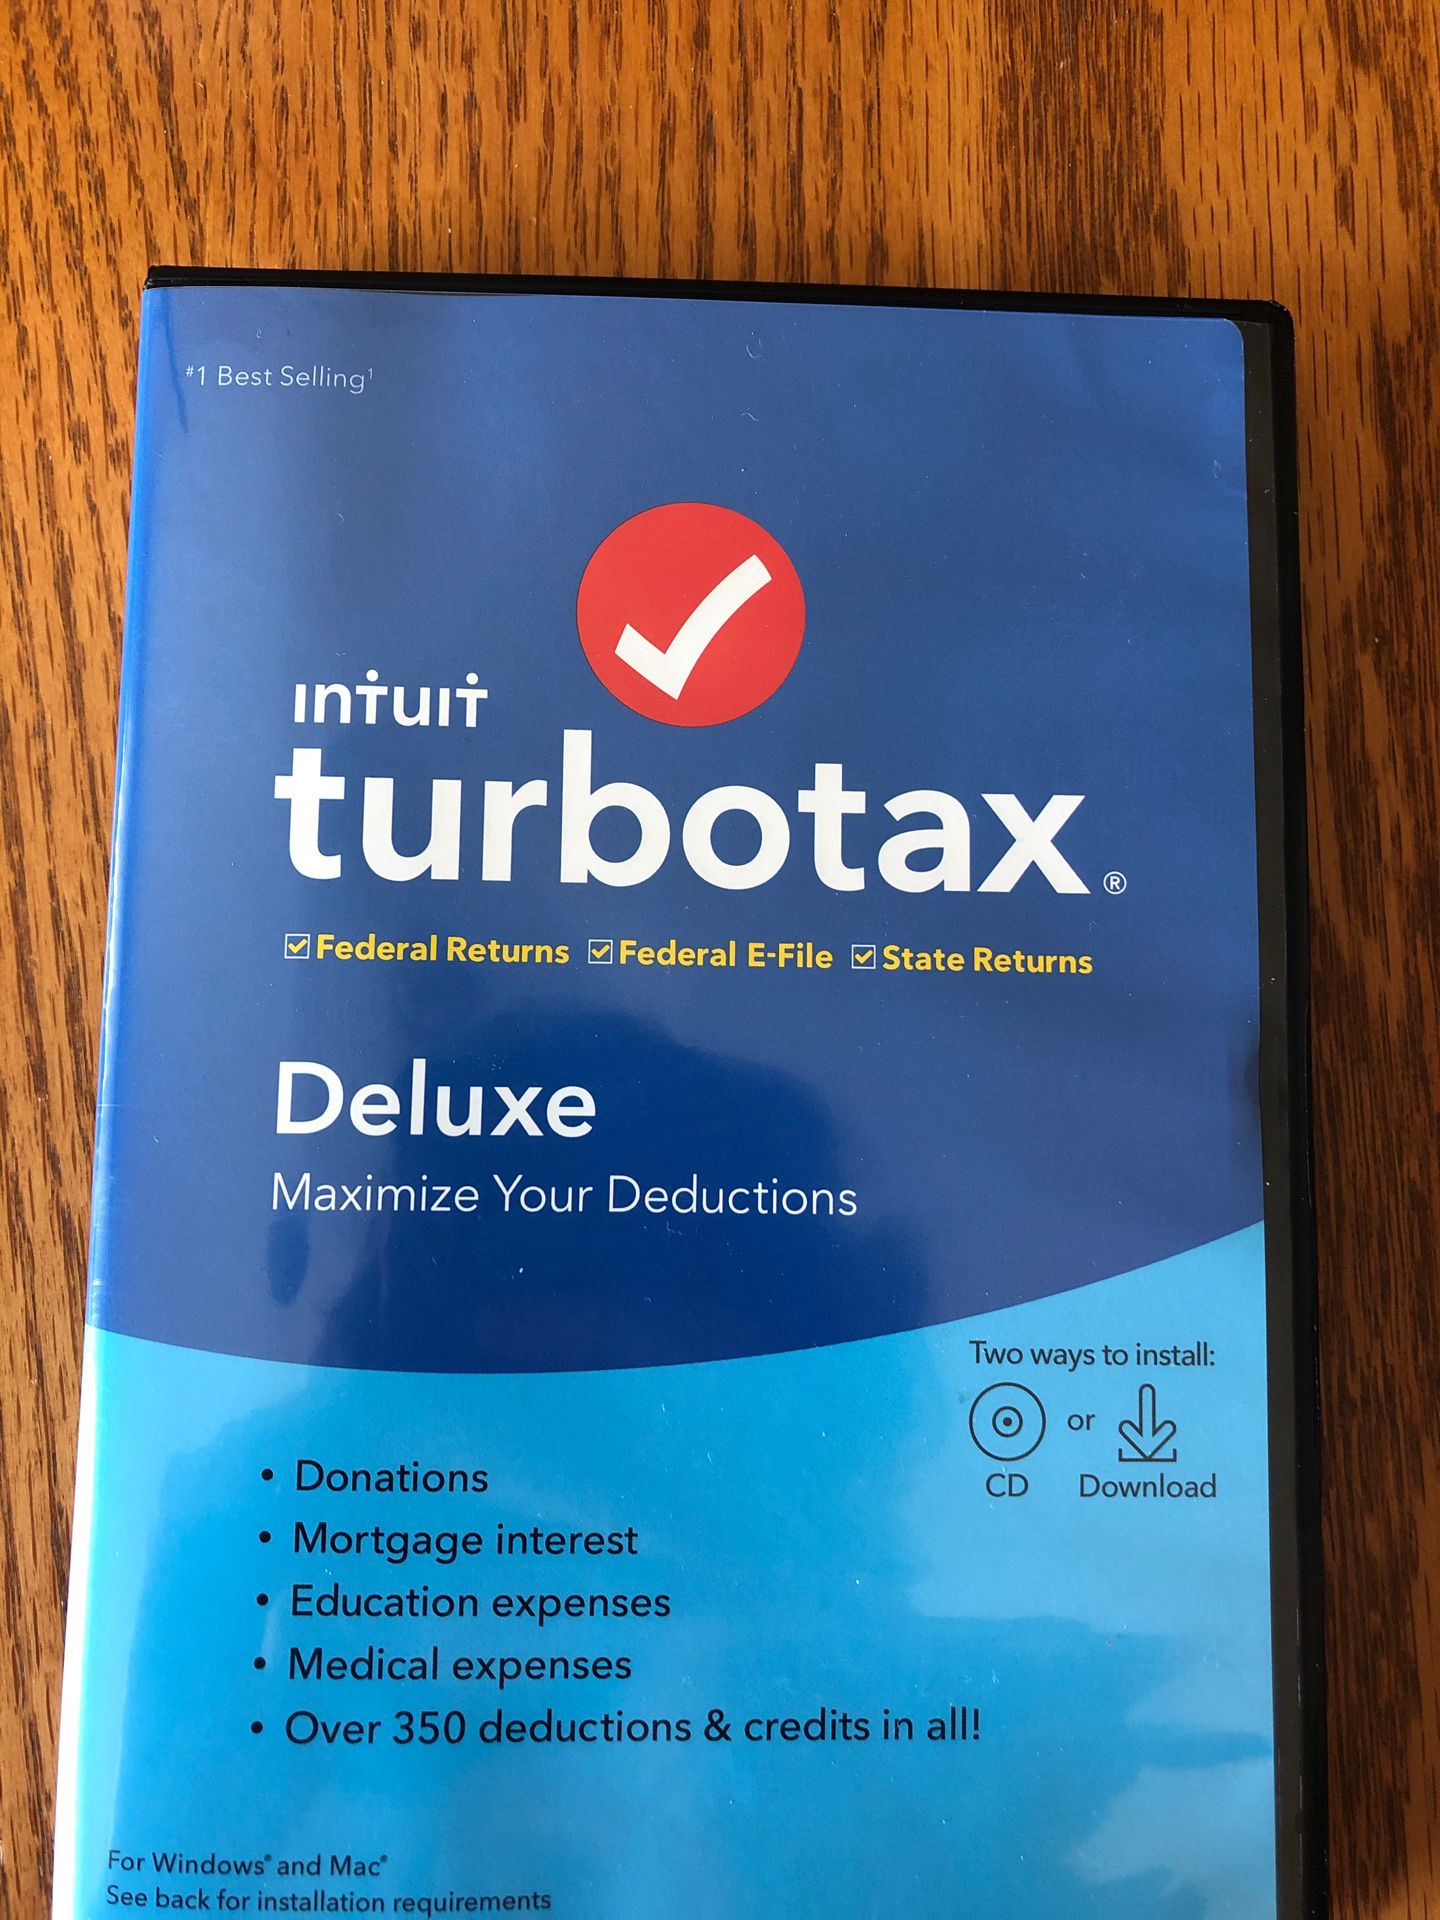 TurboTax software. Brand new! Never used